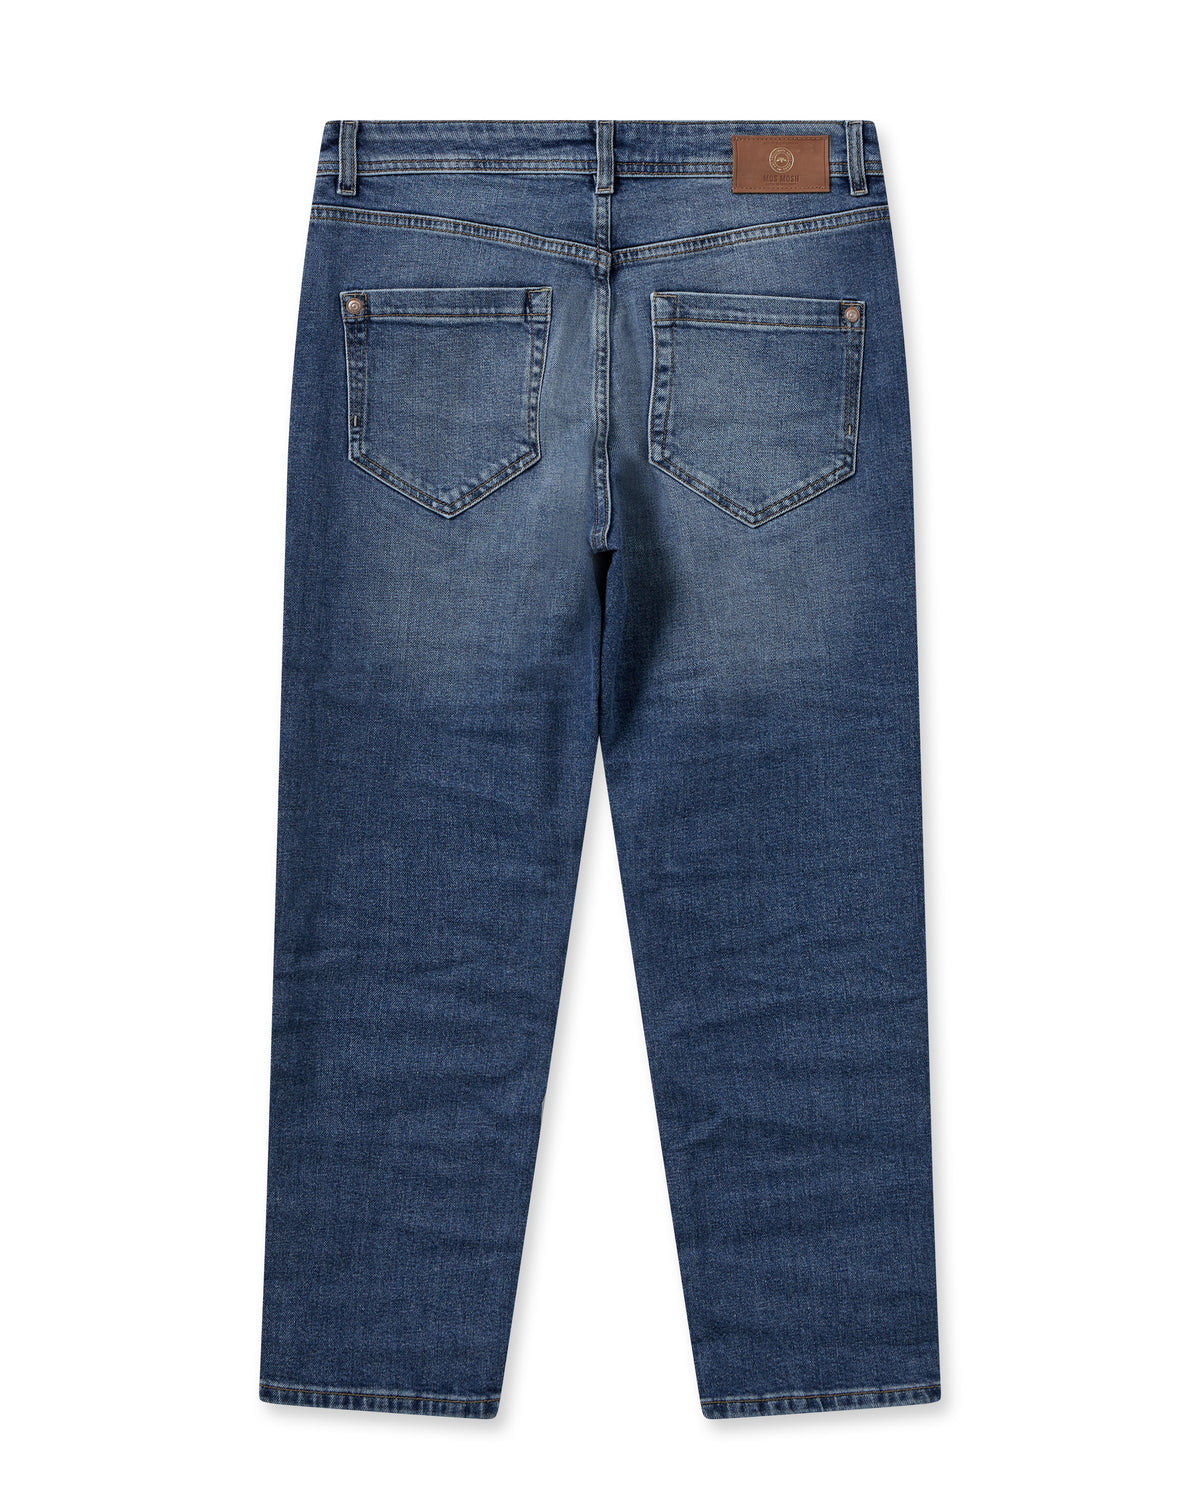 Mid rise tapered jeans with stone wash and whiskering